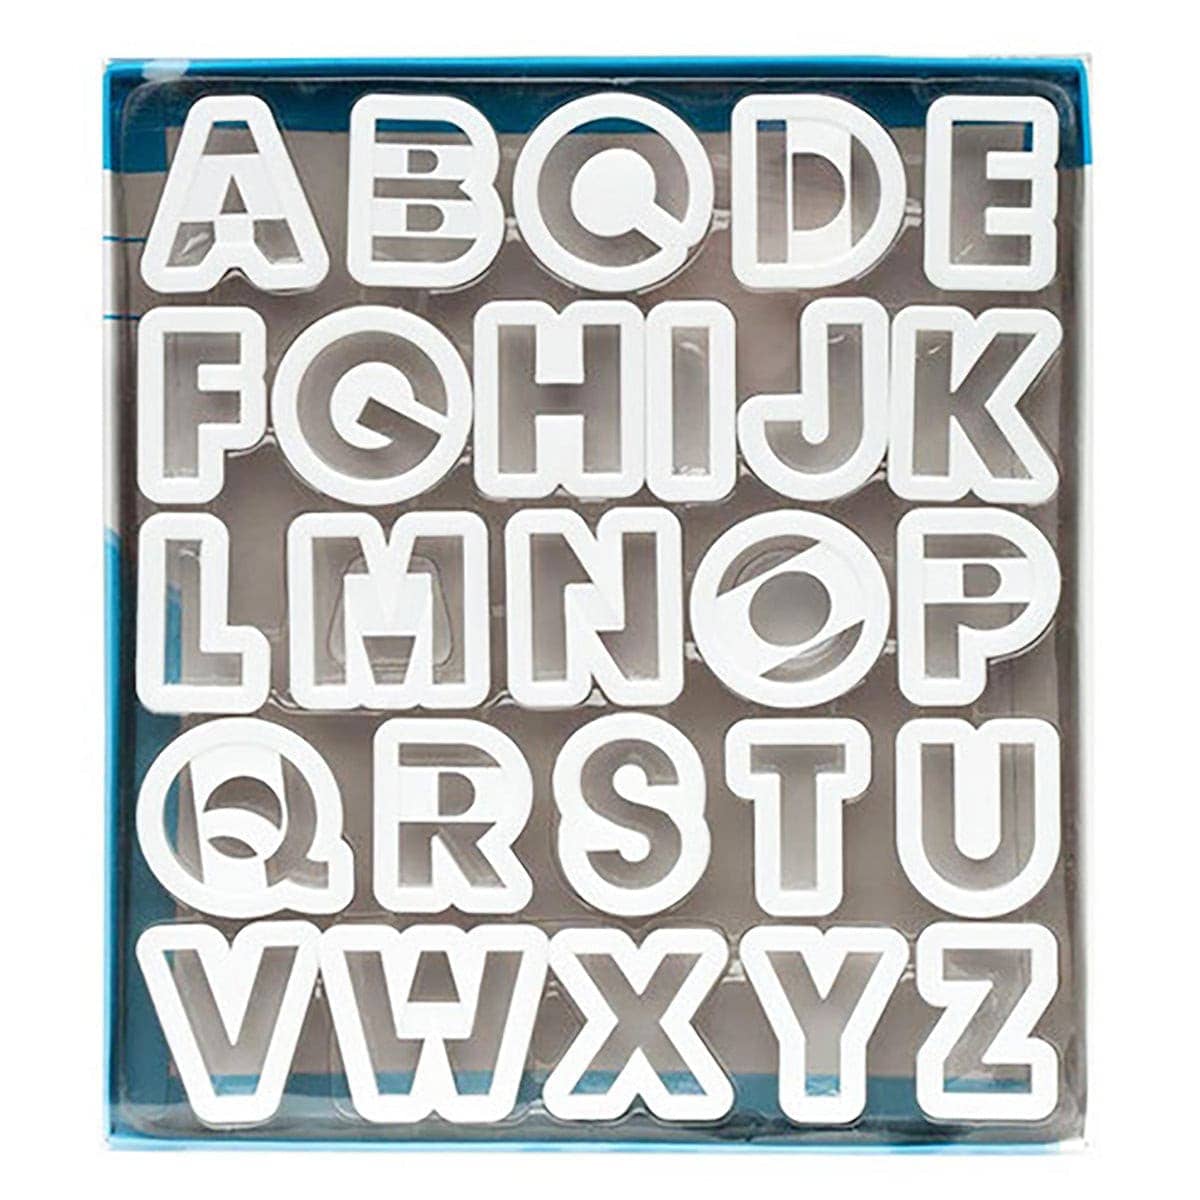 KETAR Alphabet Baking Pan Cookie Cutters - Brownie Pan with Letter